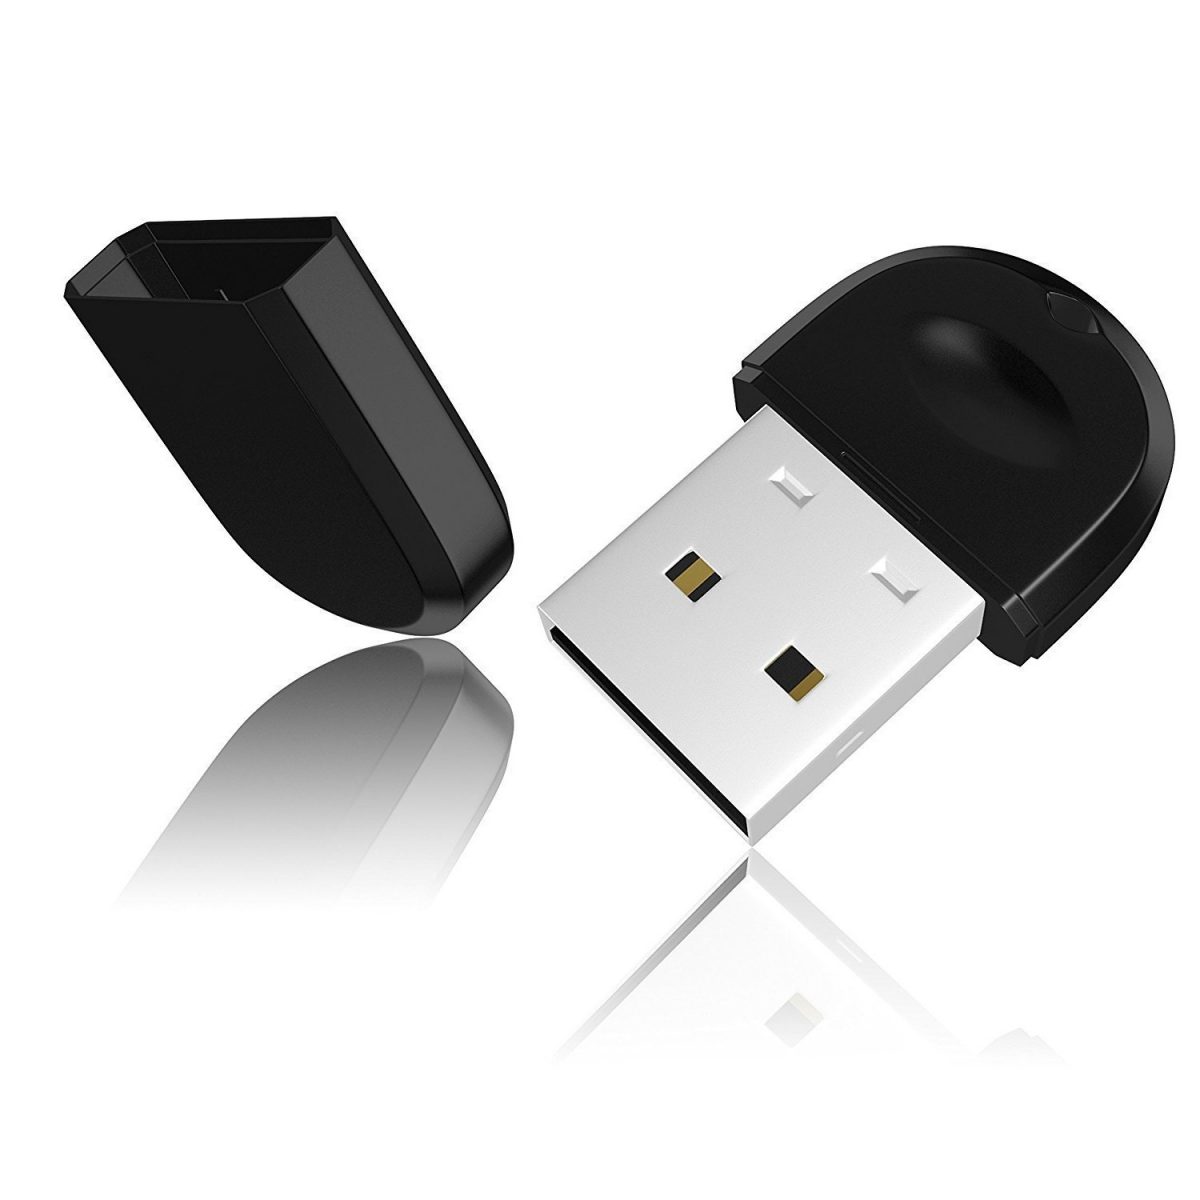 Unraveling The Purpose Of The Wireless Sync Dongle